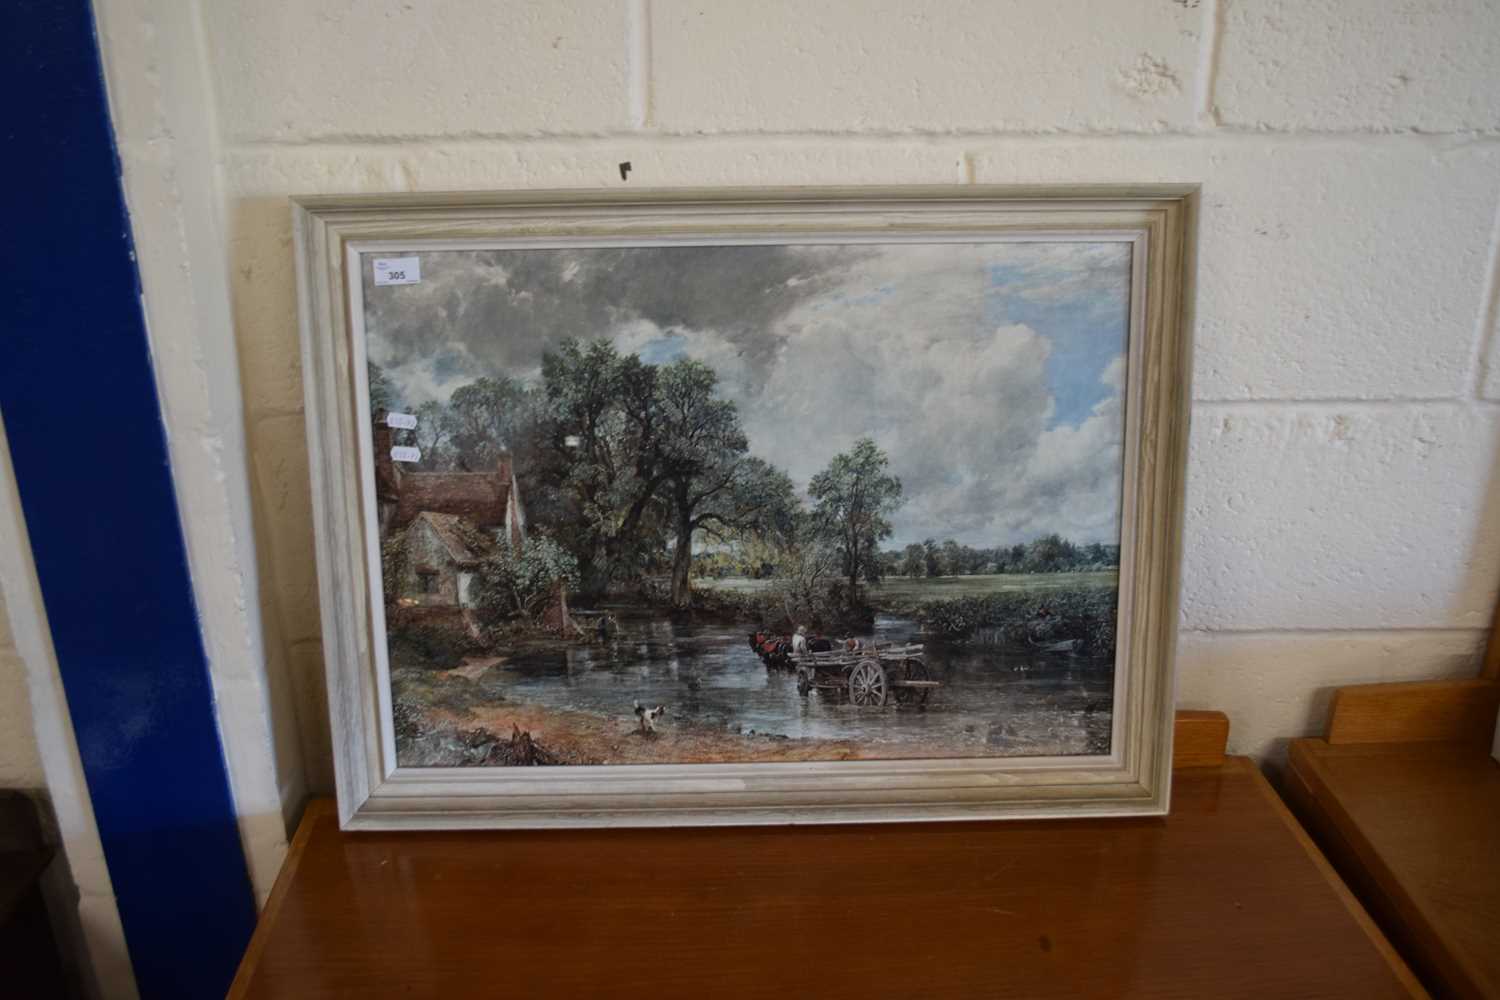 FRAMED PRINT AFTER CONSTABLE, THE HAYWAIN